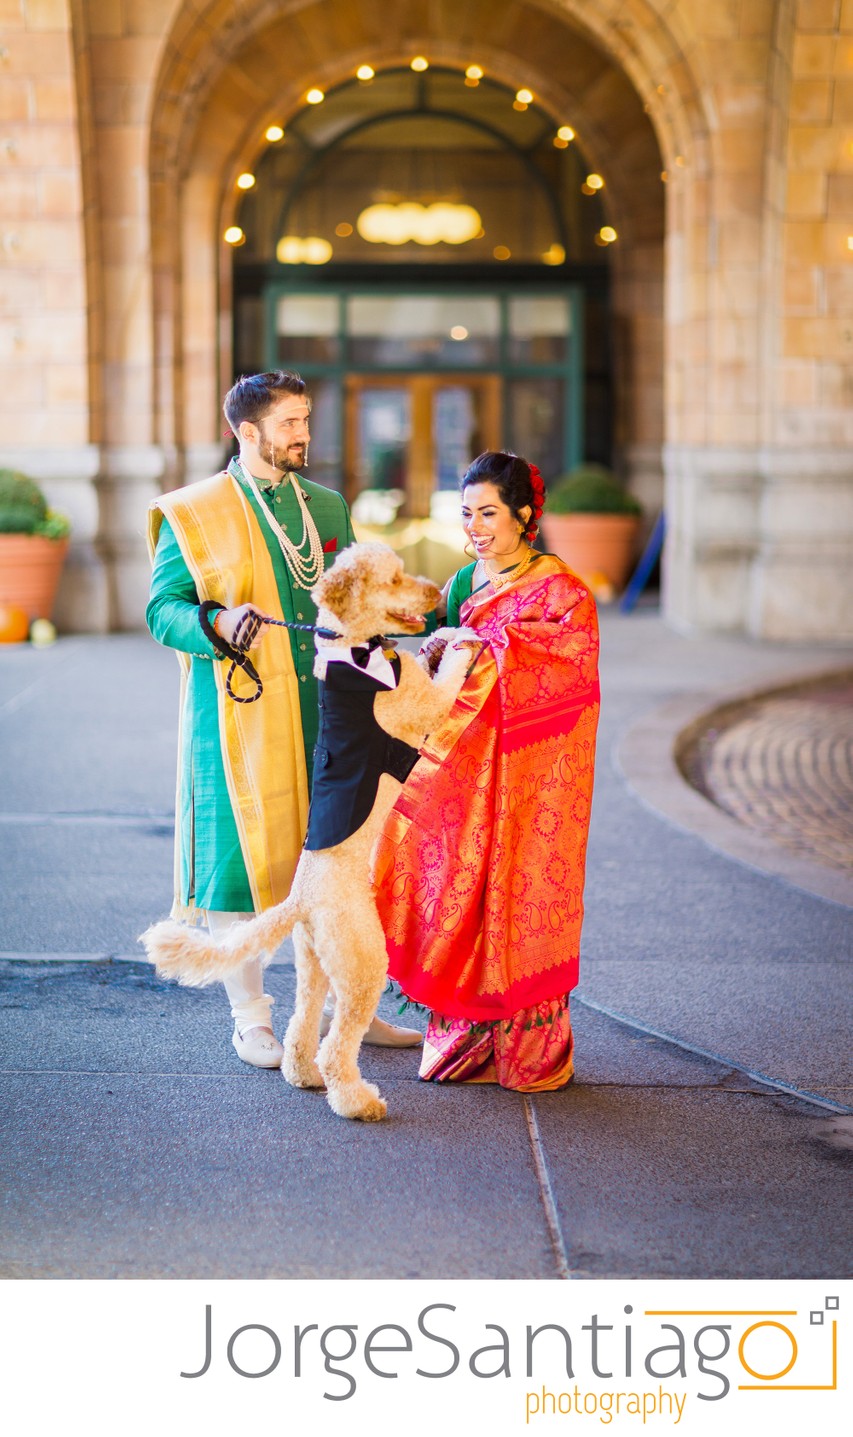 Pet Friendly Wedding Venues in Pittsburgh: The Pennsylvanian